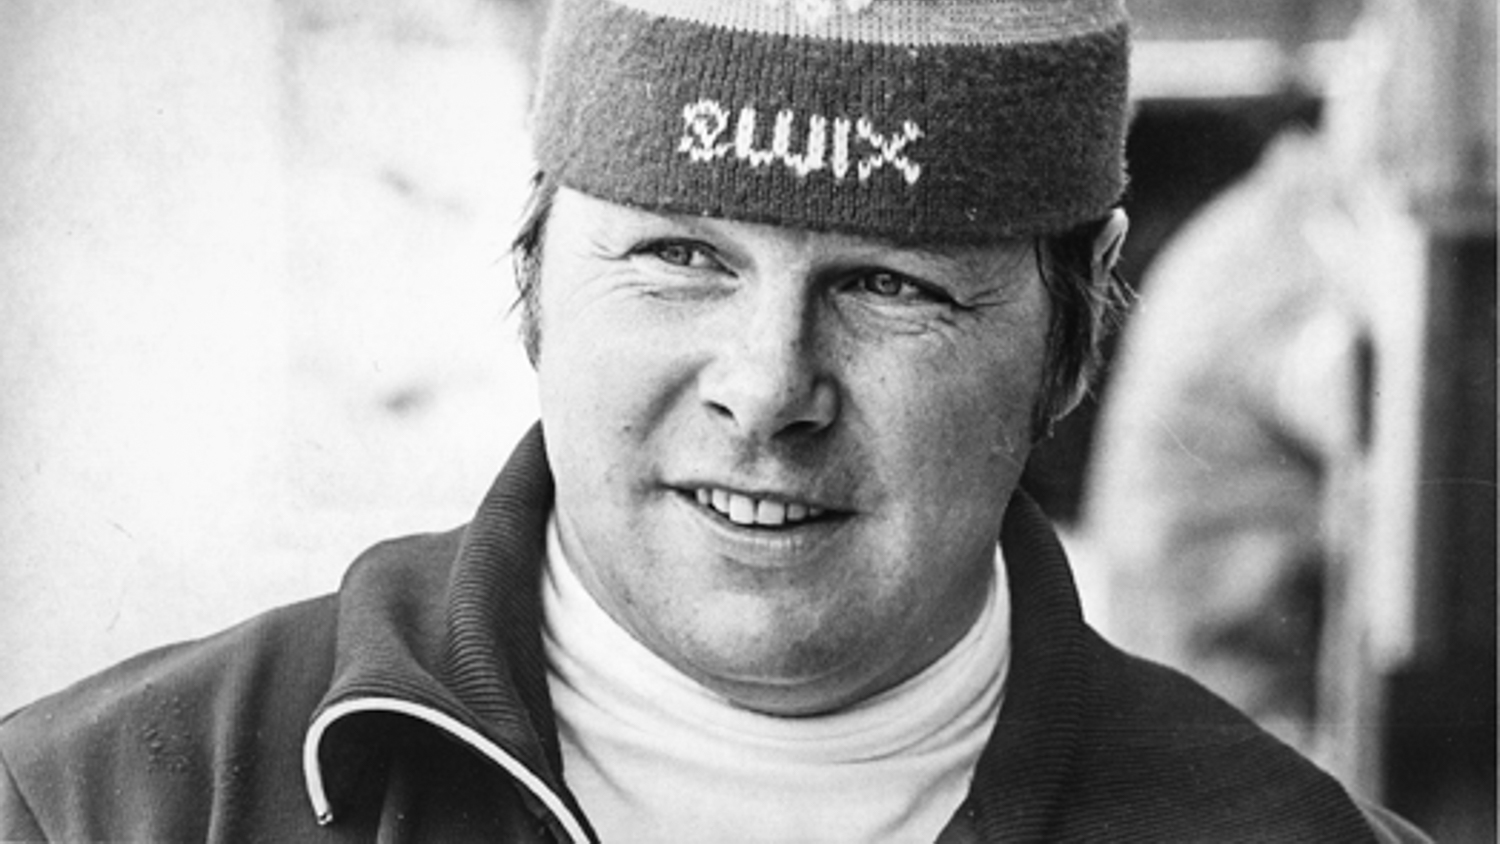 Bjorger Pettersen is pictured in Inuvik in 1971